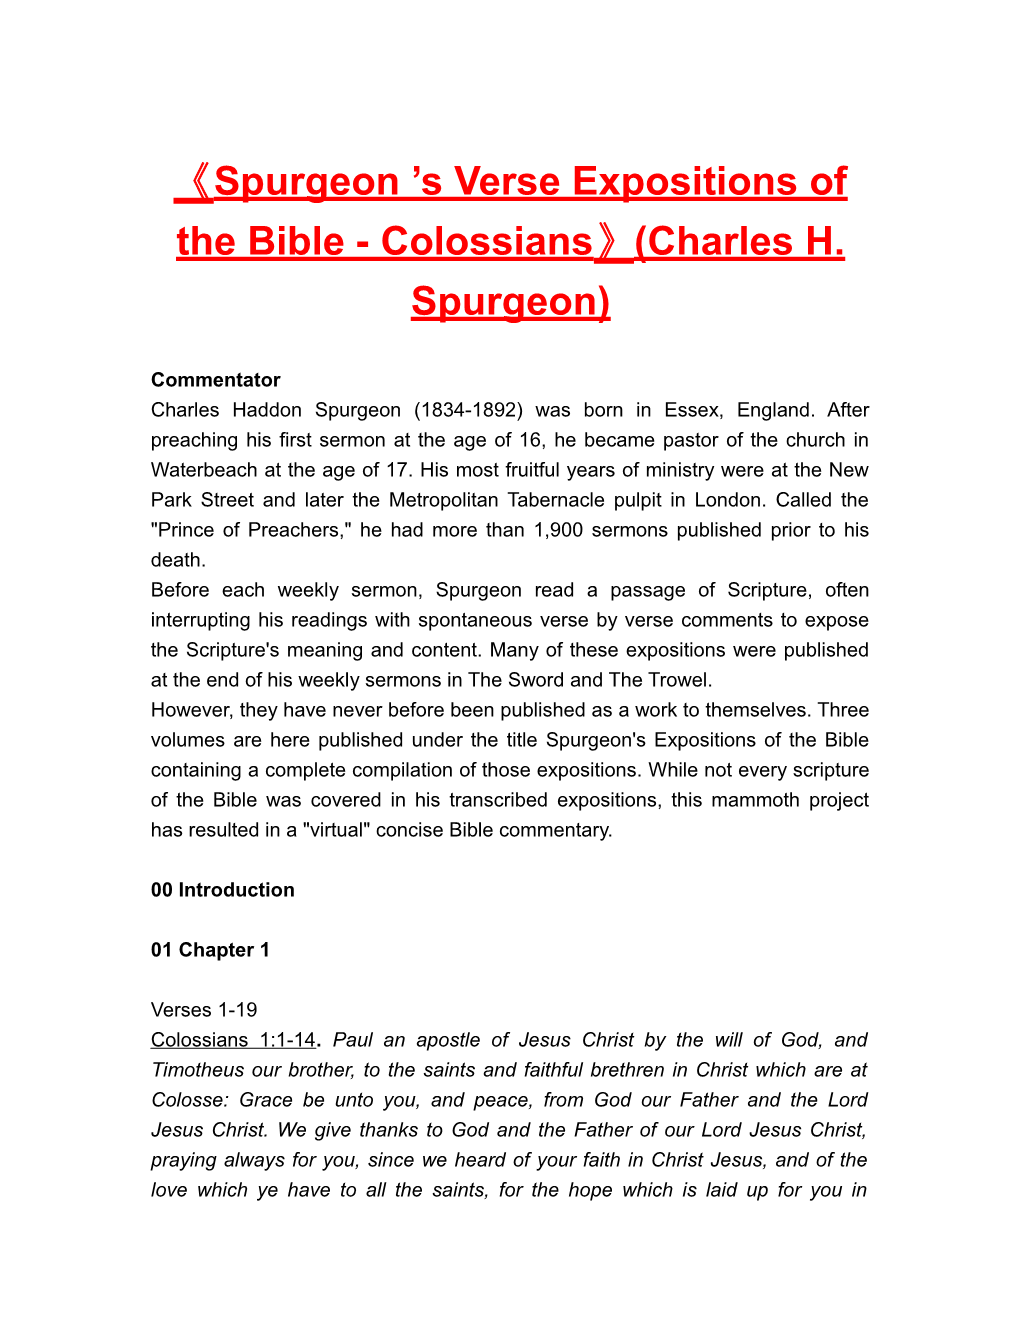 Spurgeon S Verseexpositions of the Bible - Colossians (Charles H. Spurgeon)